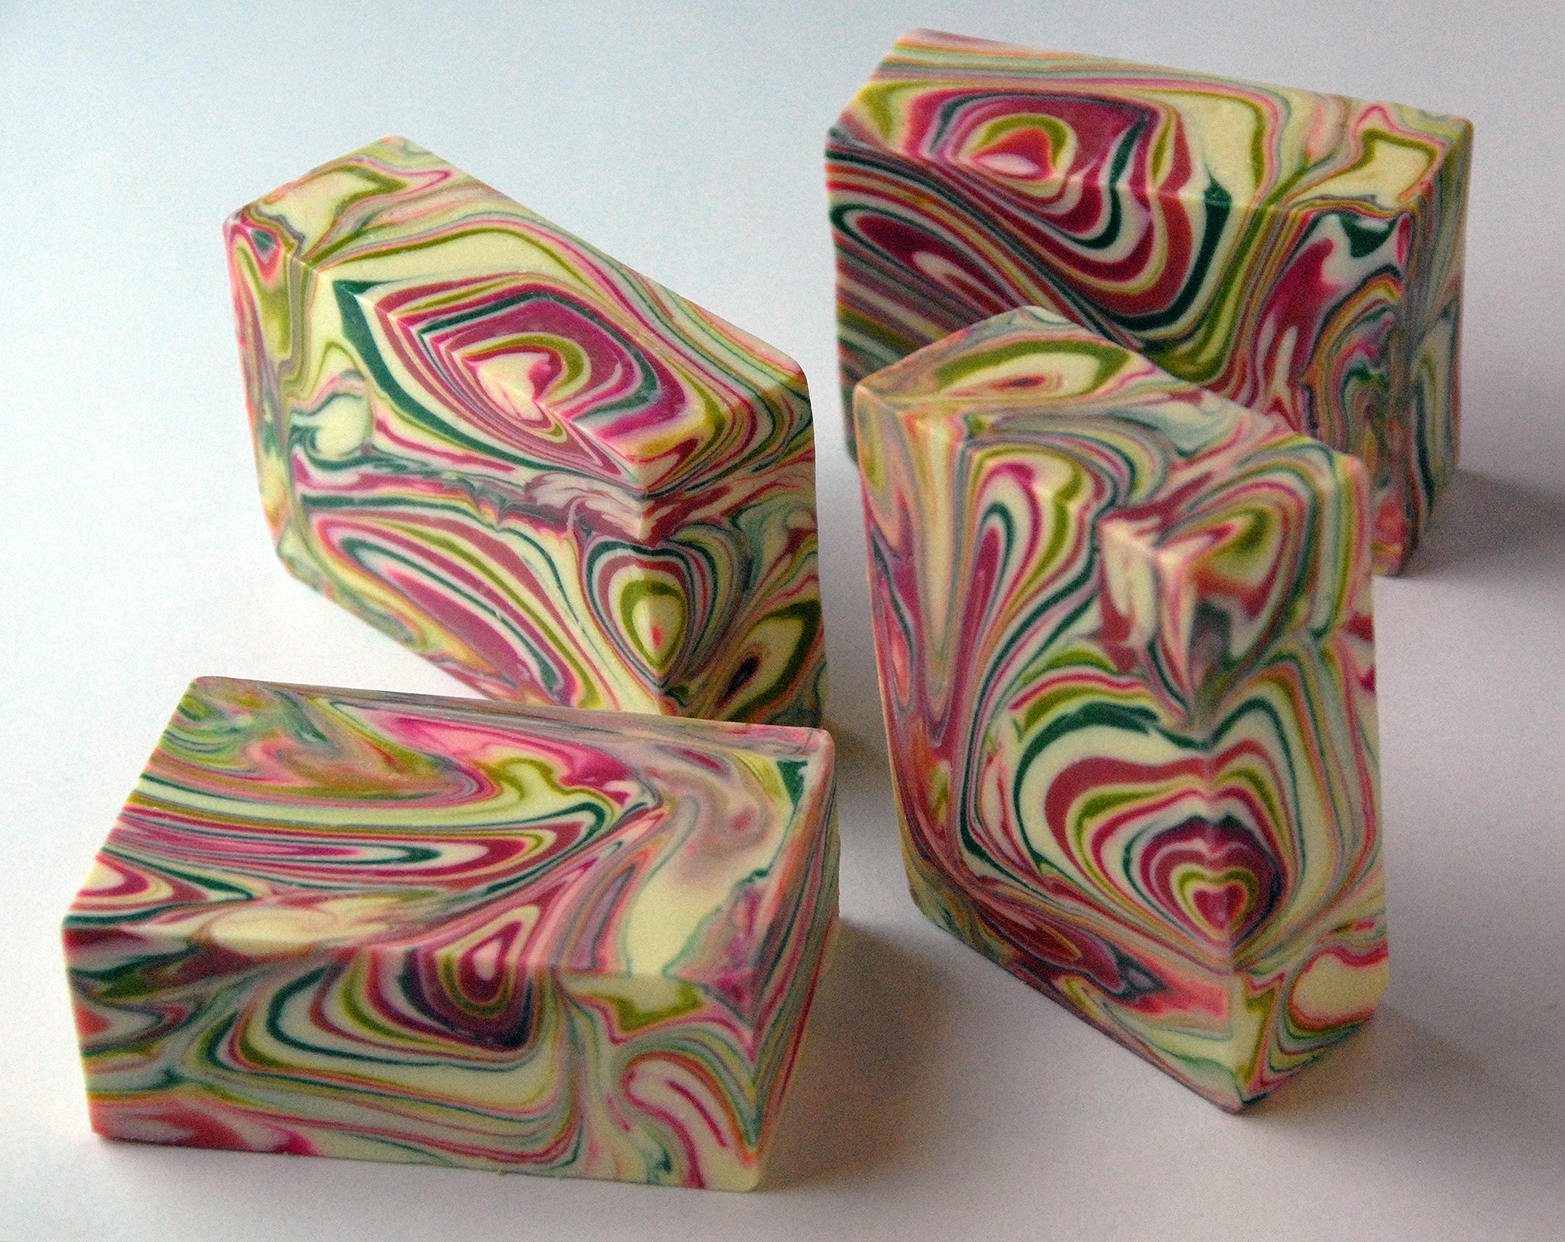 Soap Colorants: How to Add Swirls of Color to Your Homemade Soap